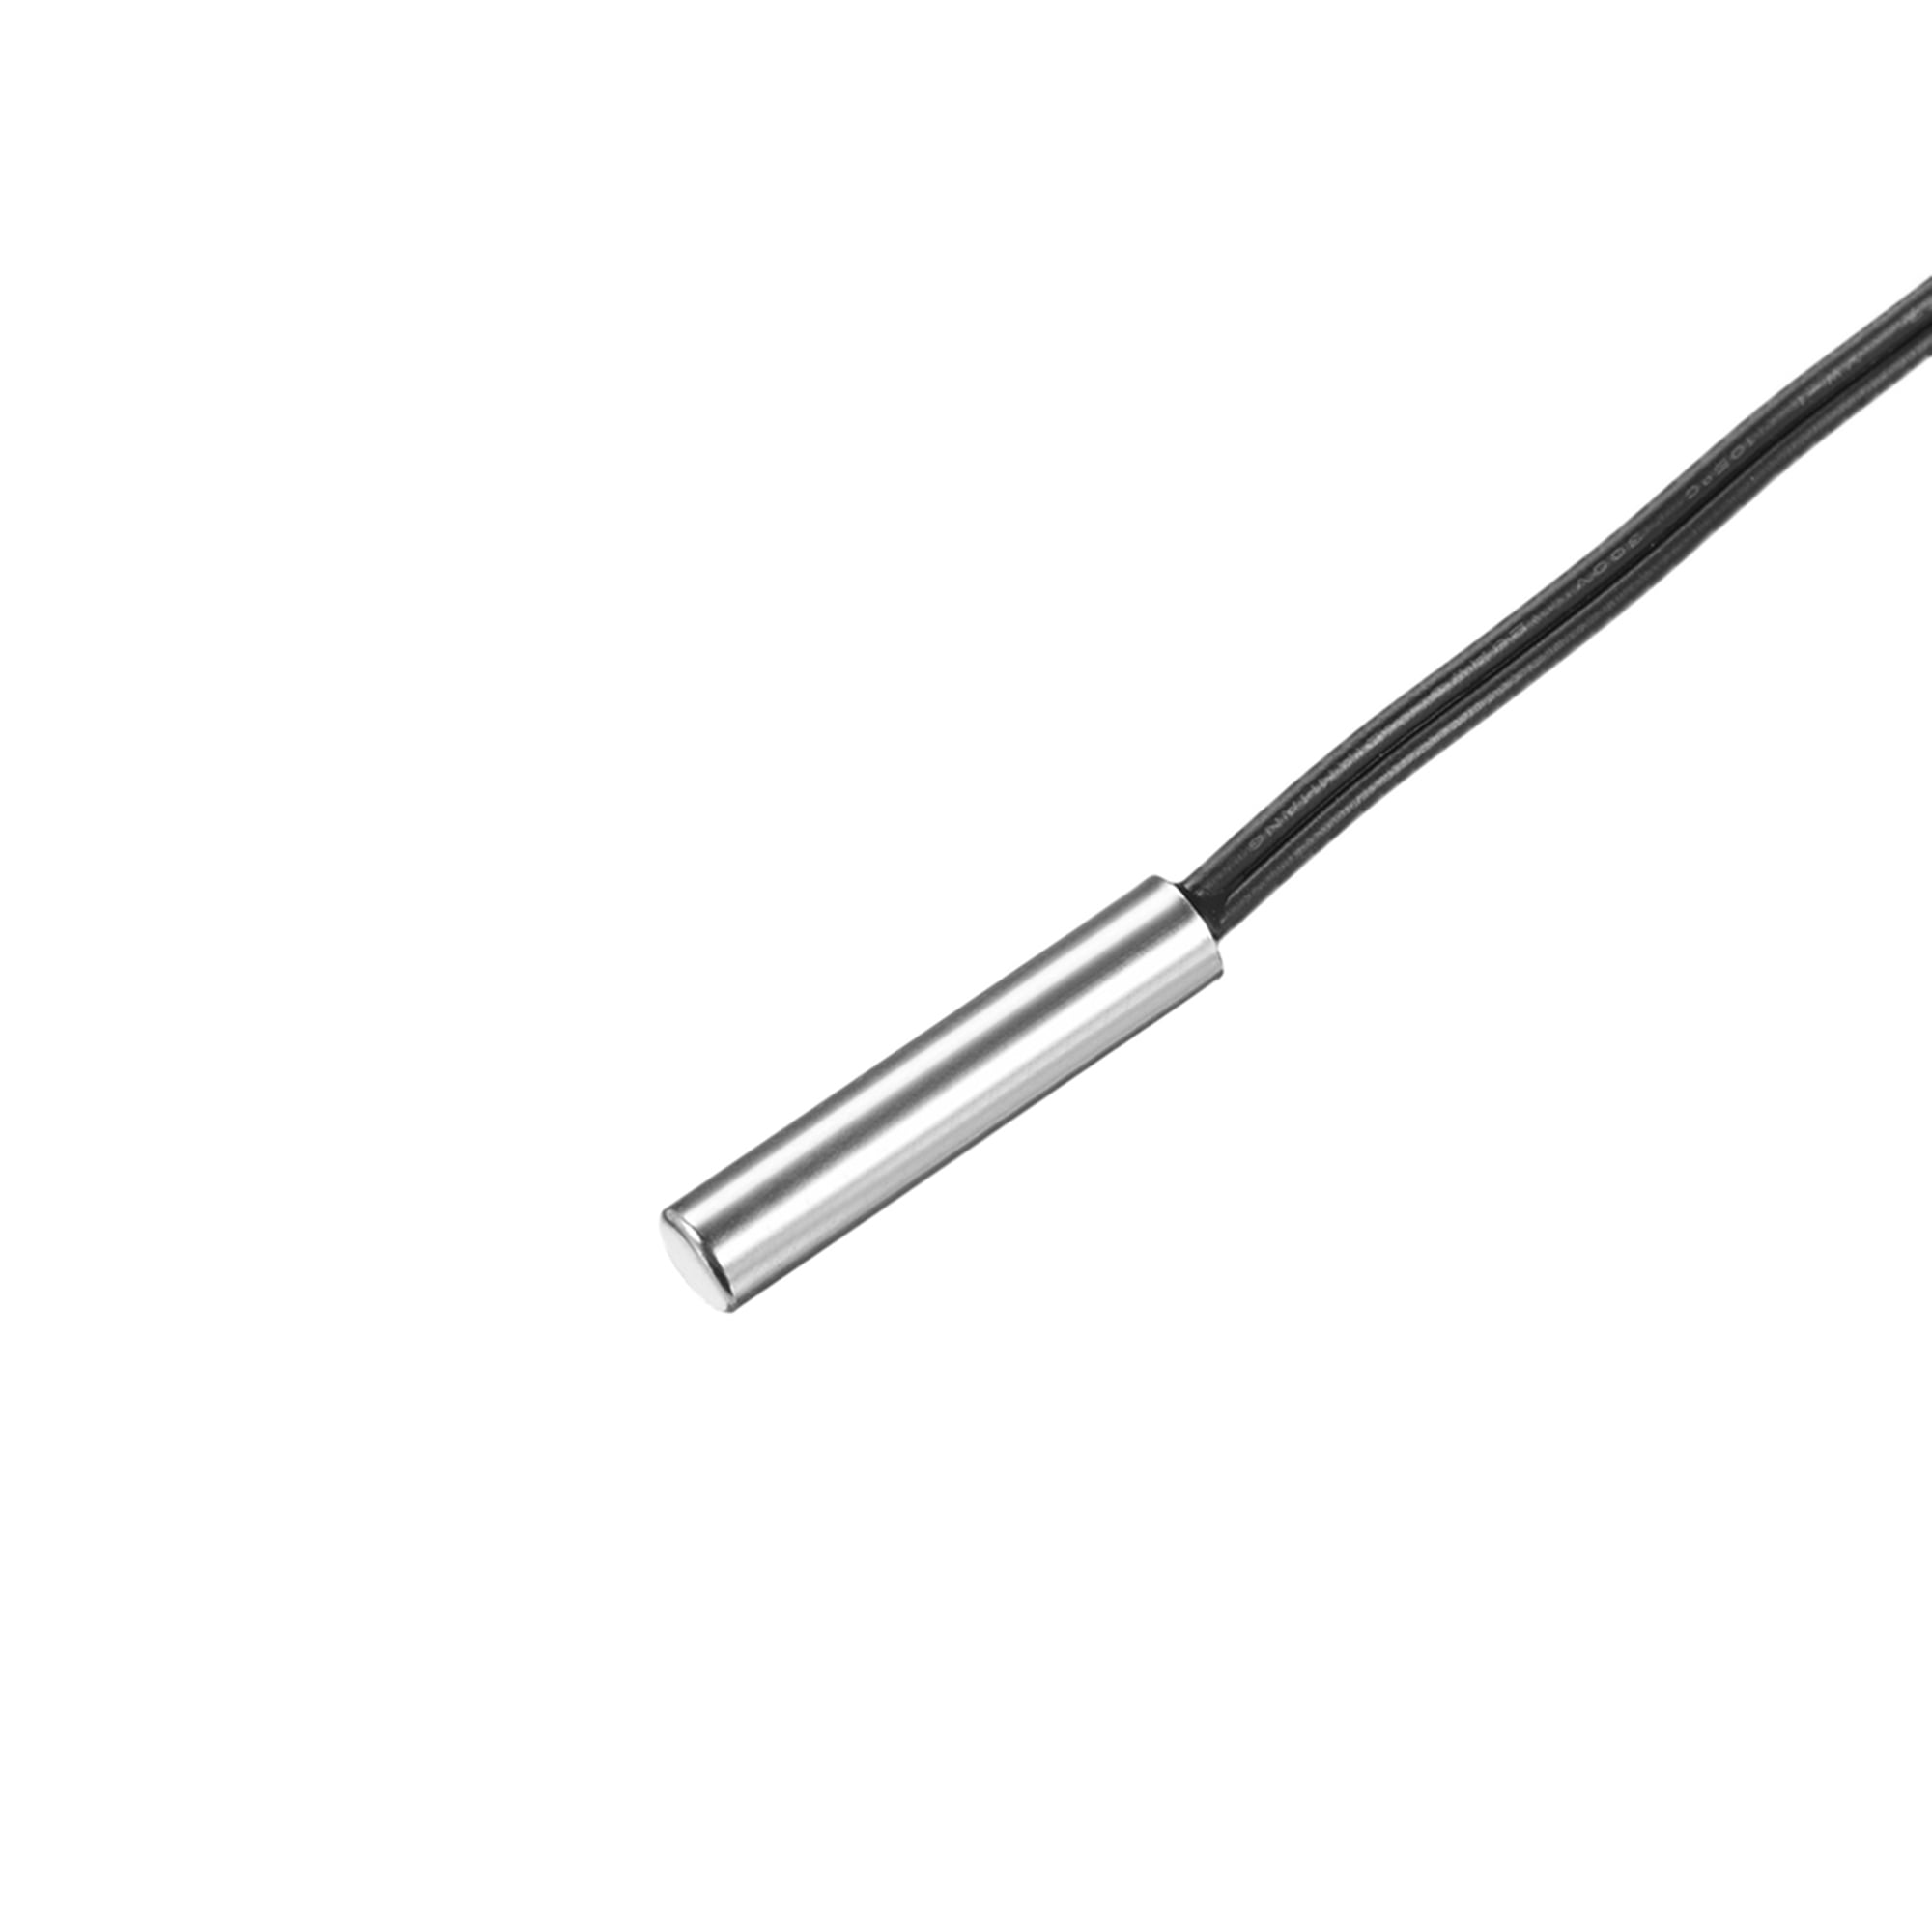 200K NTC thermistor Probe 15.7-inch Stainless Steel Temperature Sensitive Temperature Sensor for air Conditioning 